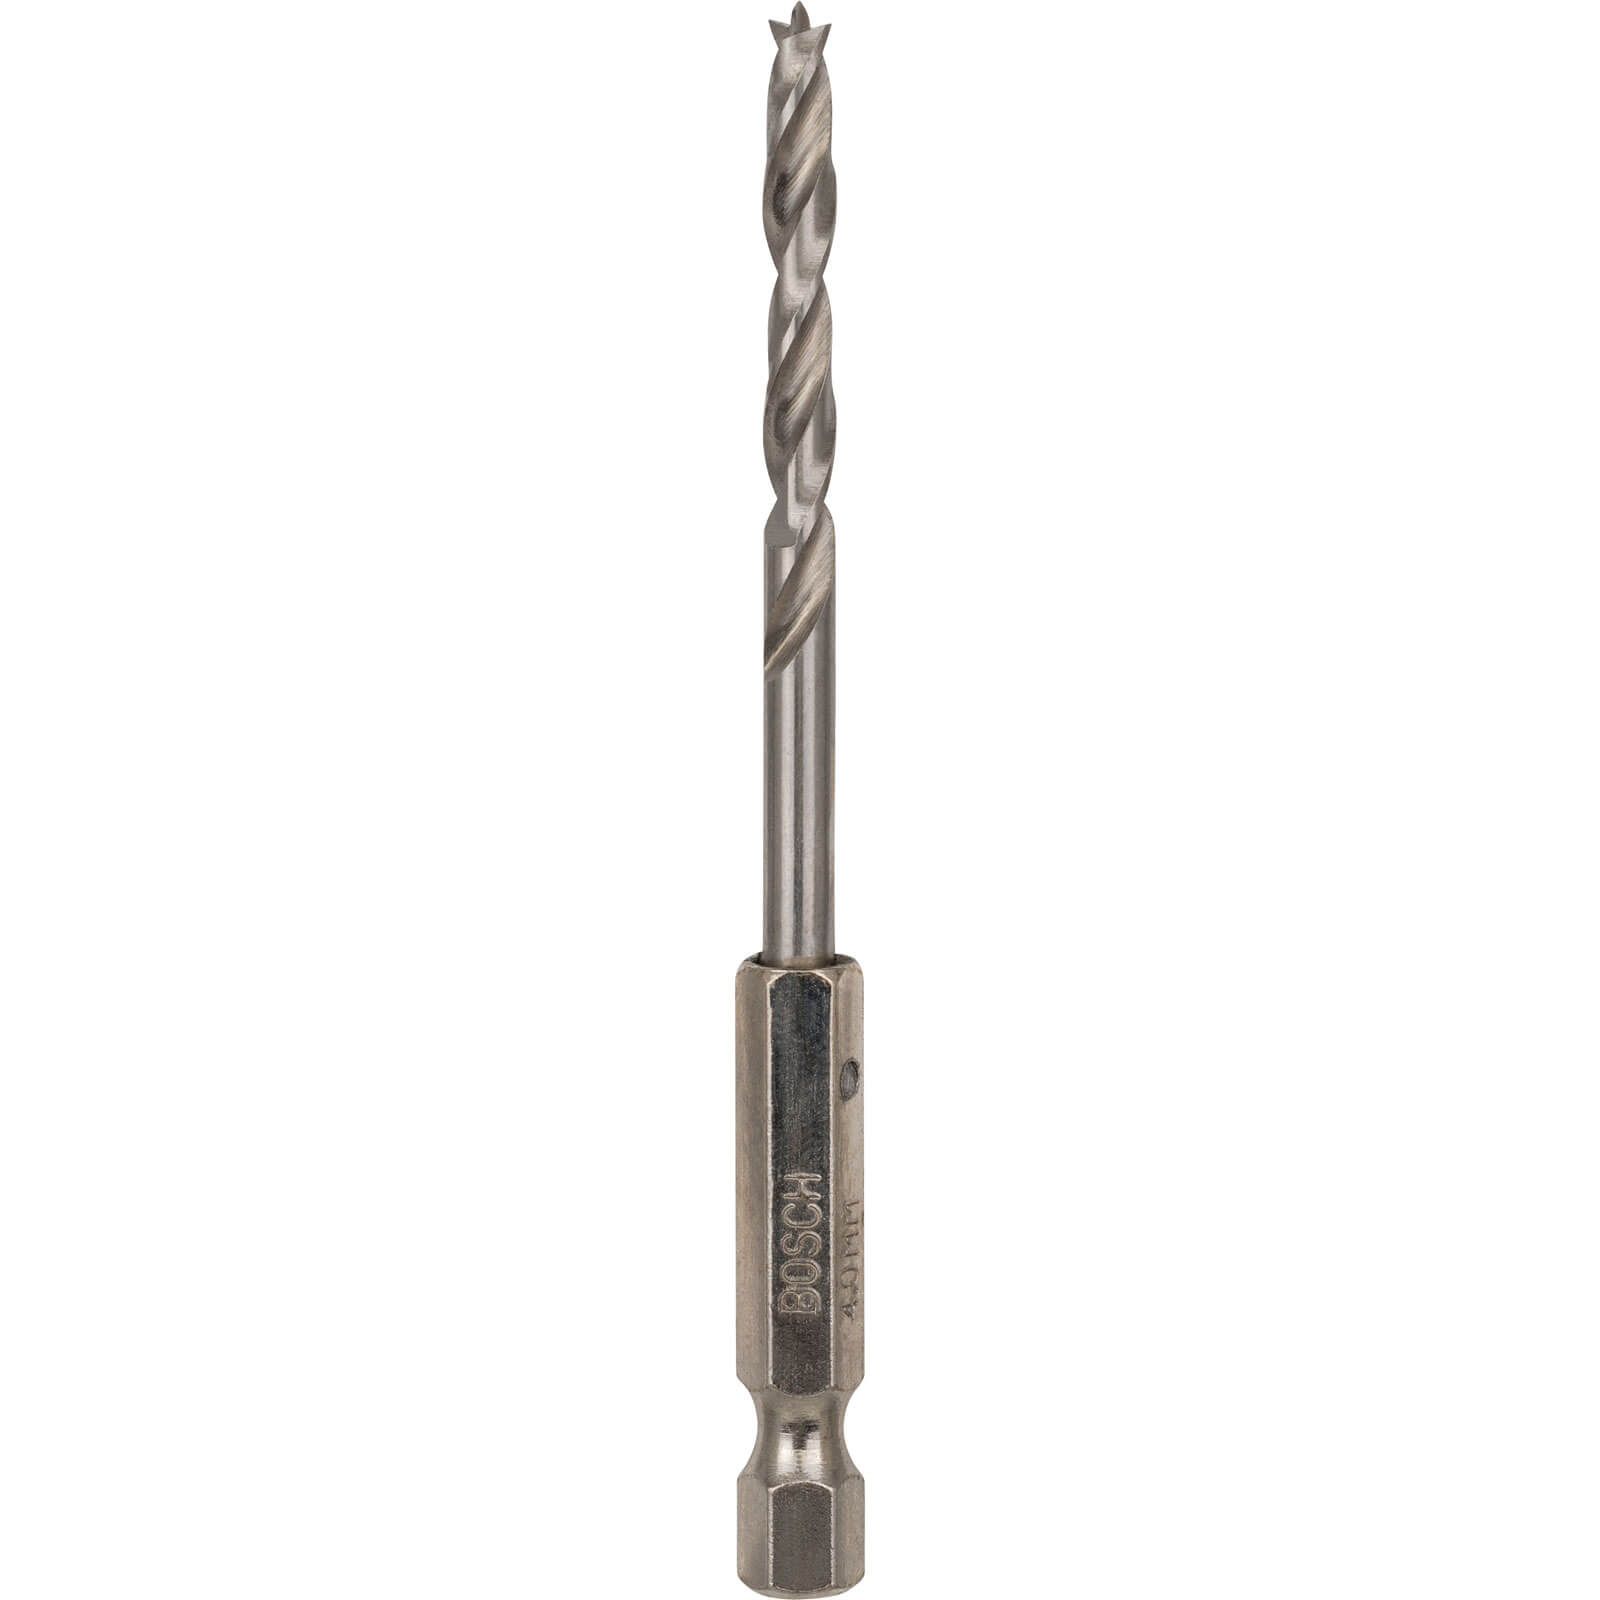 Image of Bosch Hex Shank Drill Bit for Wood 4mm